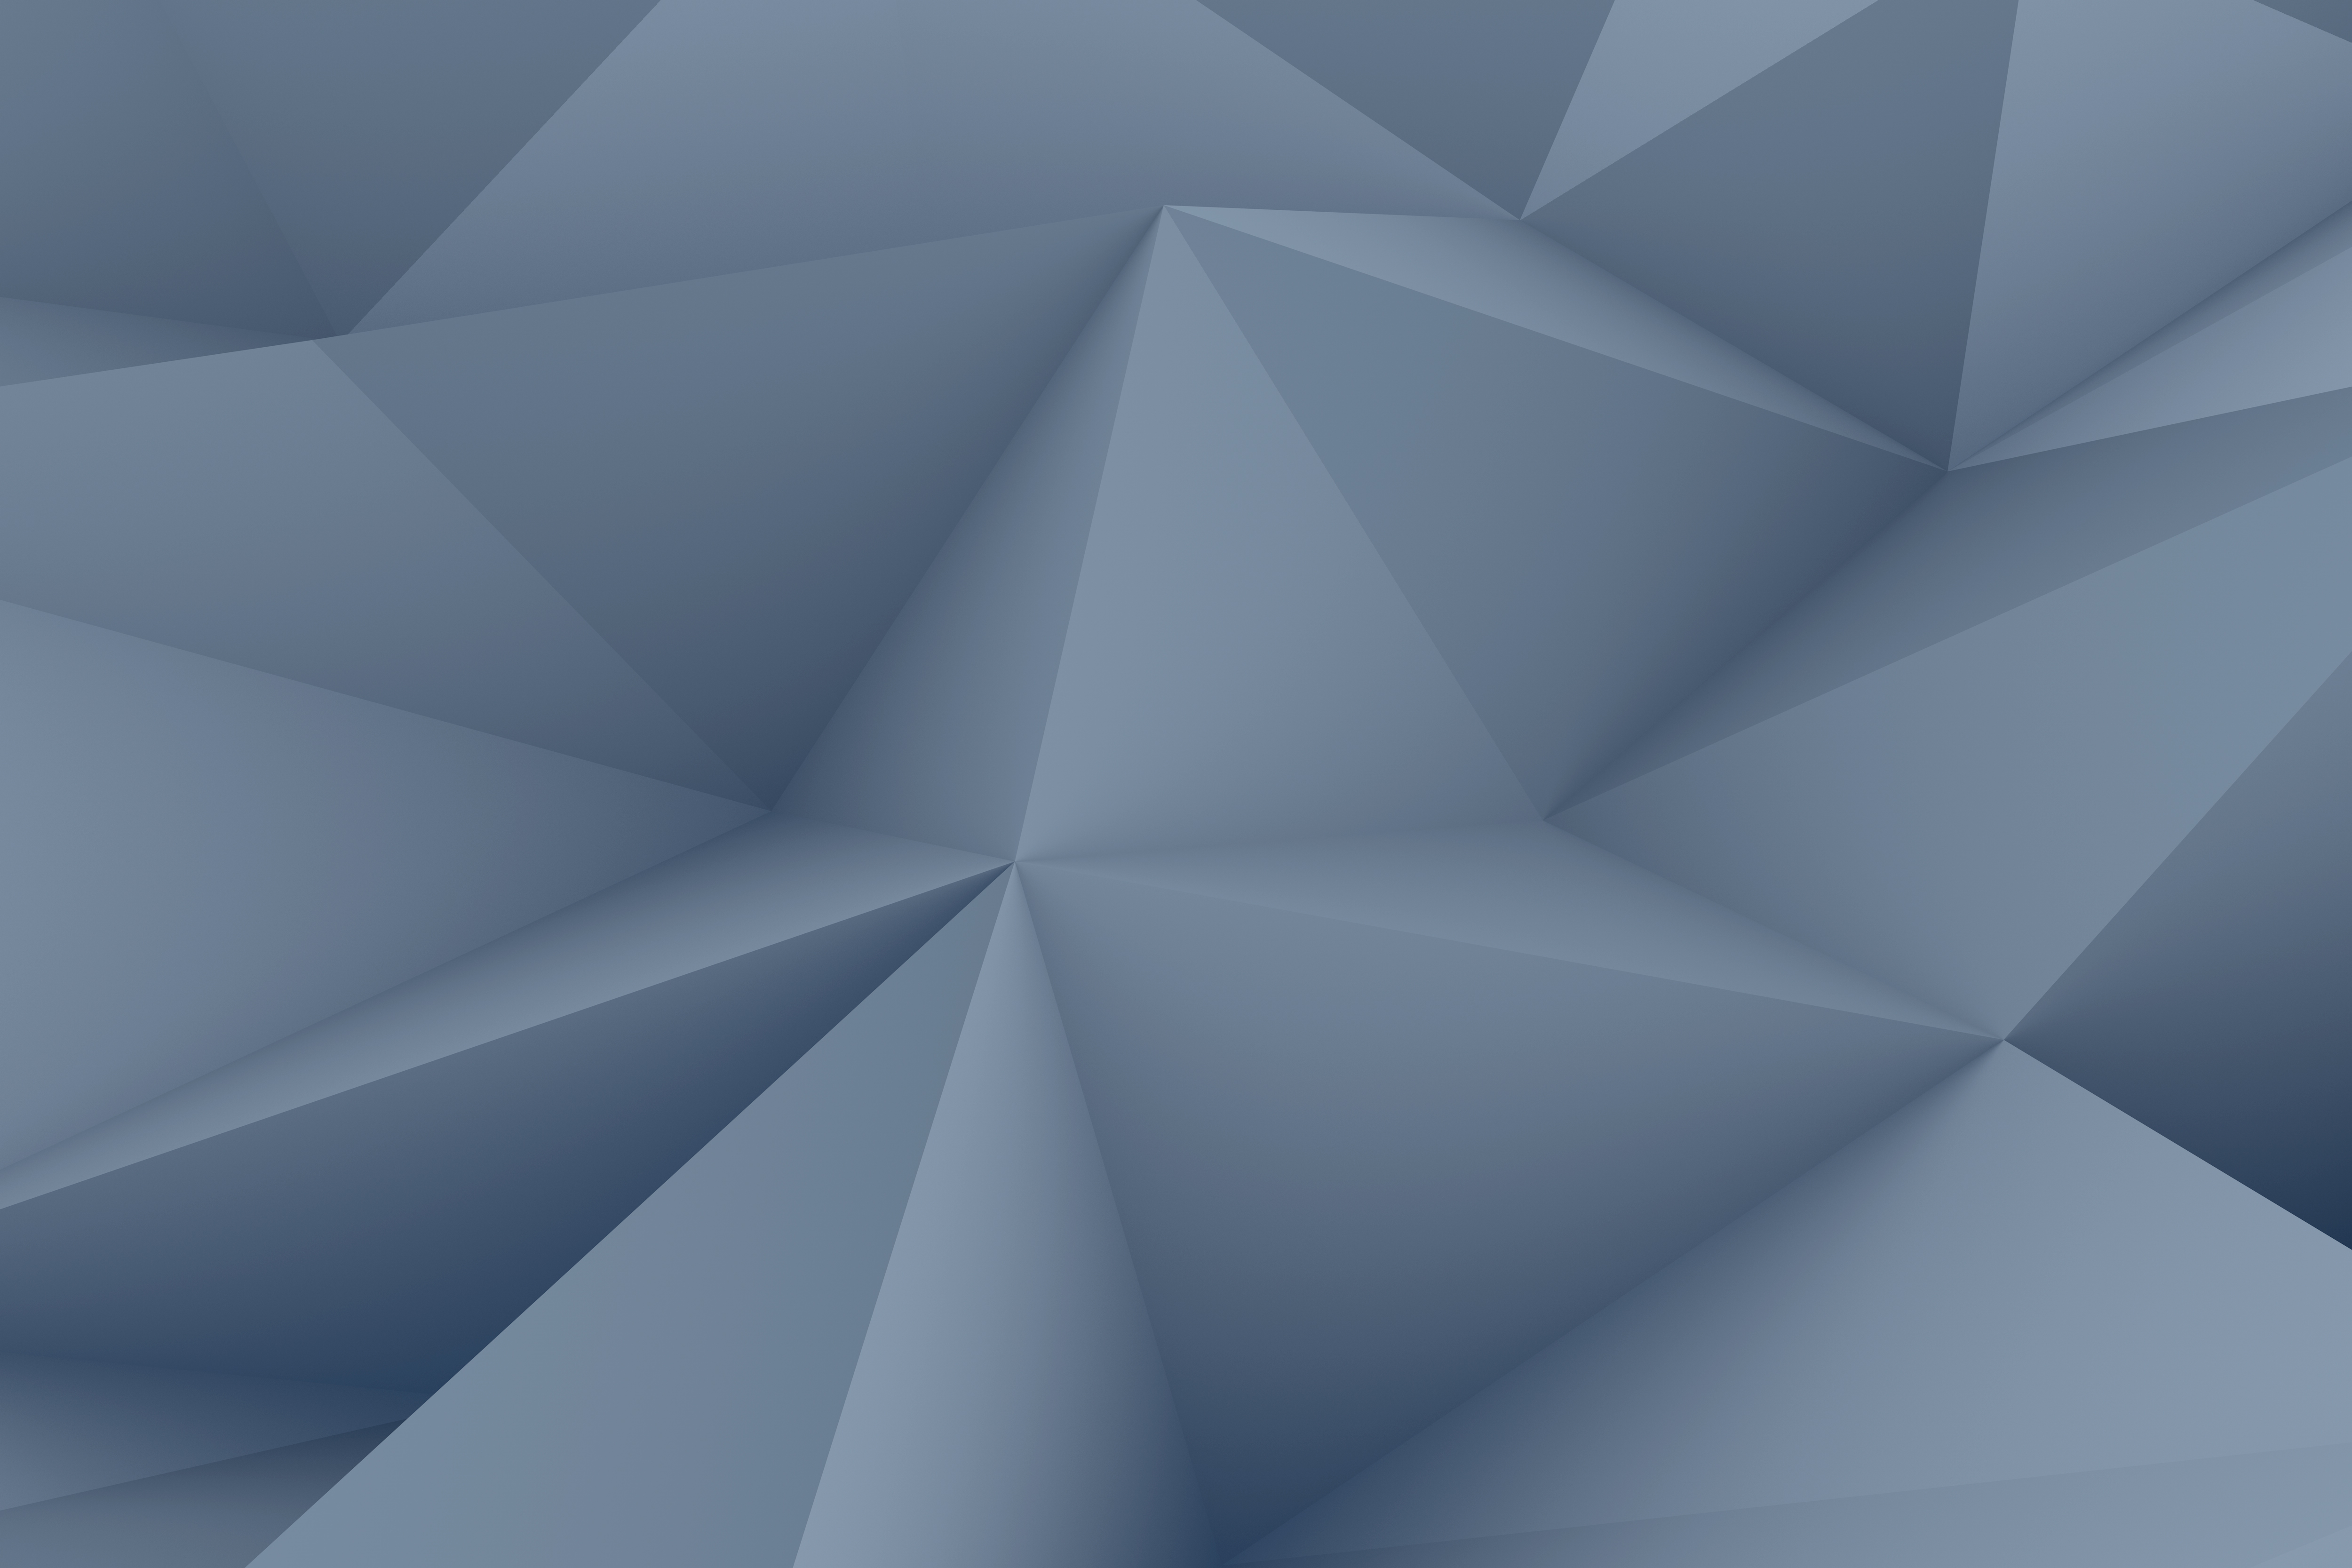 Abstract Polygon Background 4K HD Wallpapers  HD Wallpapers  ID 31713